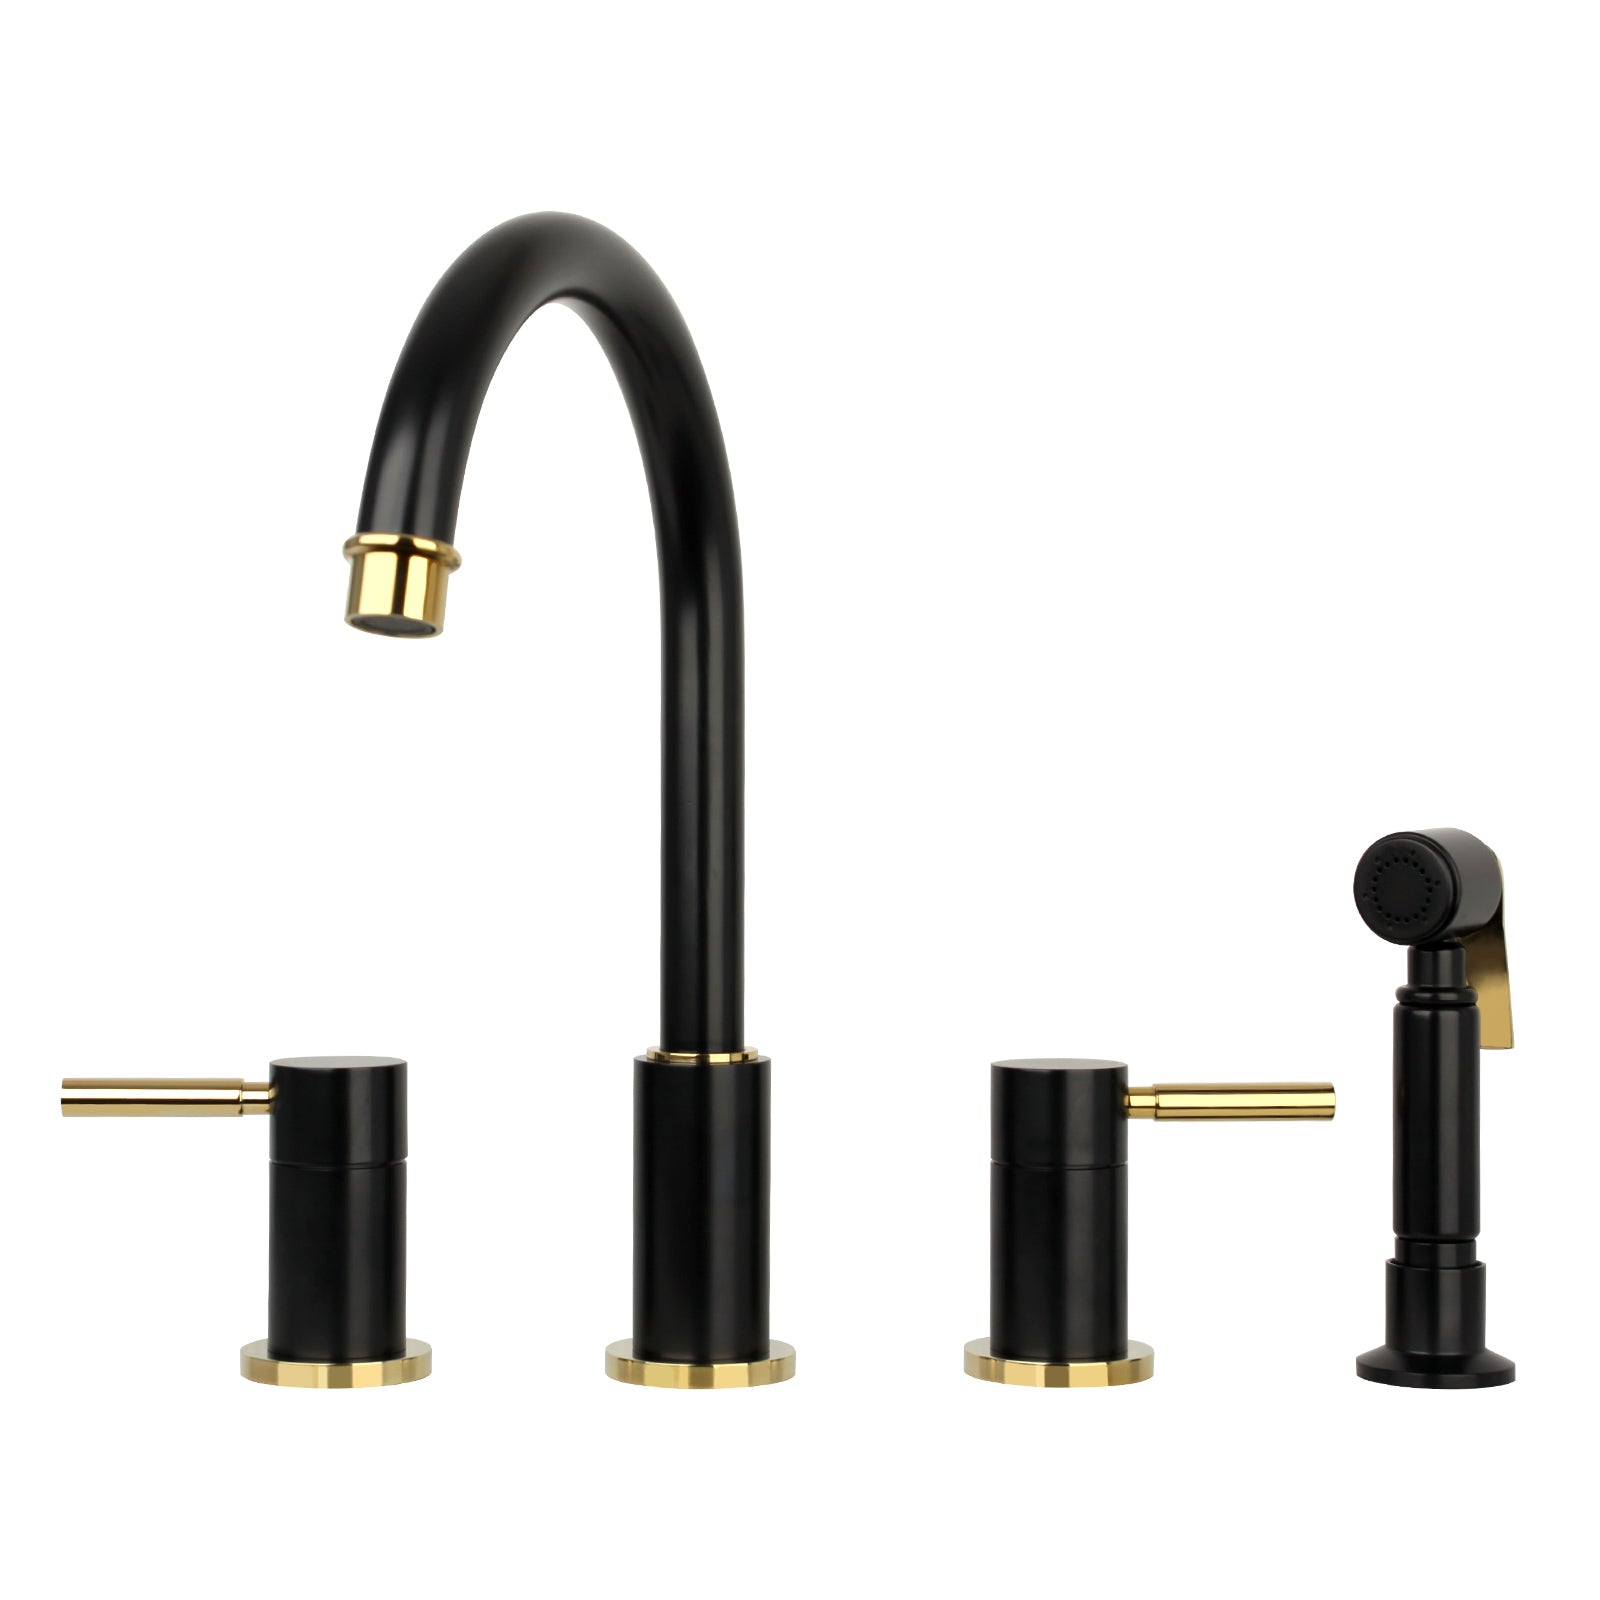 Two-Handles Matte Black & Gold Widespread Kitchen Faucet with Side Sprayer - AK96866-BLZG